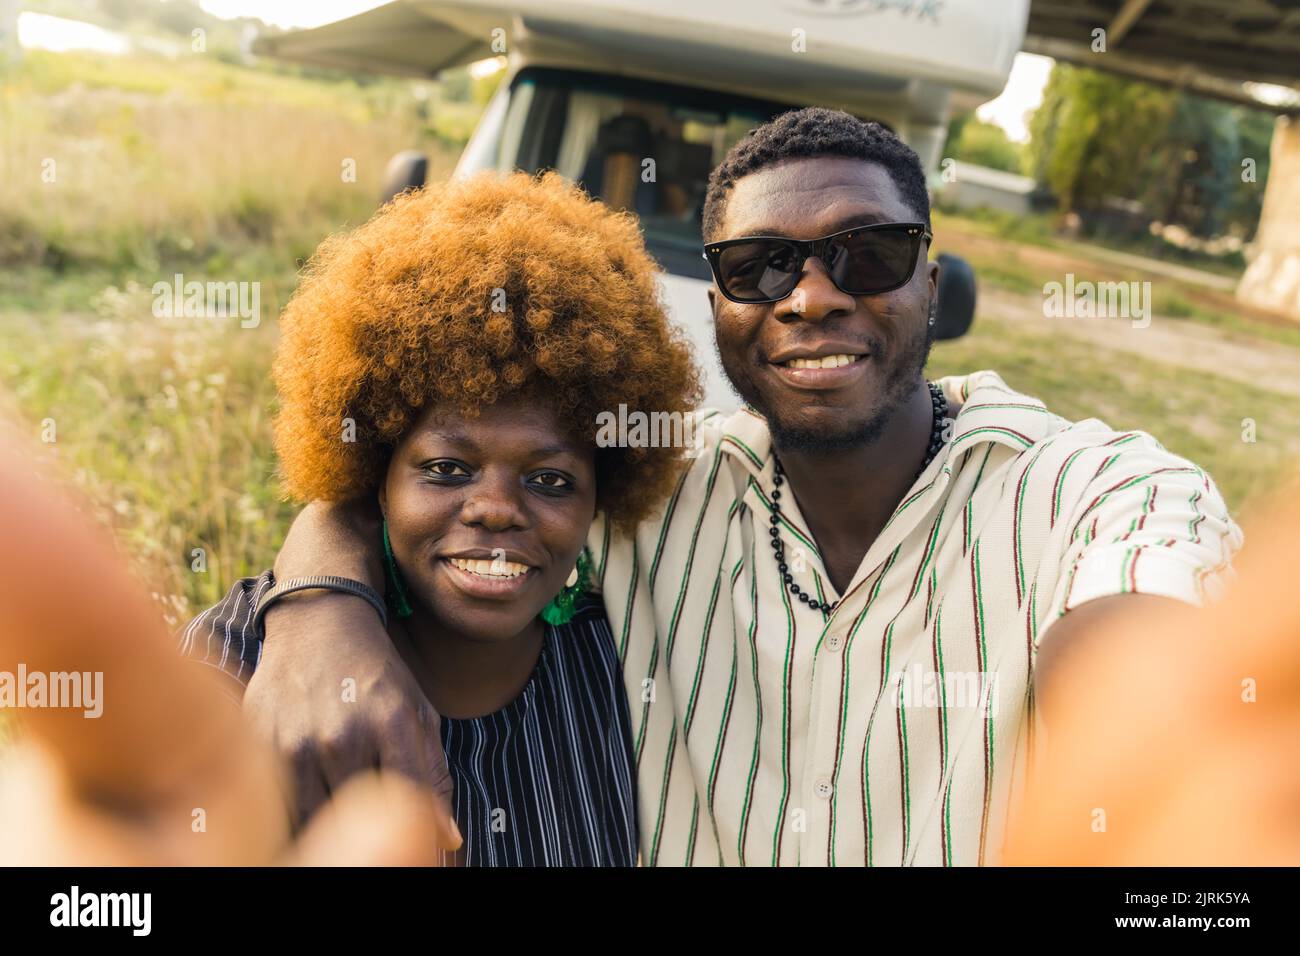 Smiling ethnic dark-skinned straight couple having a summer road trip in a camping van, hugging and taking a selfie in front of their vehicle. High quality photo Stock Photo